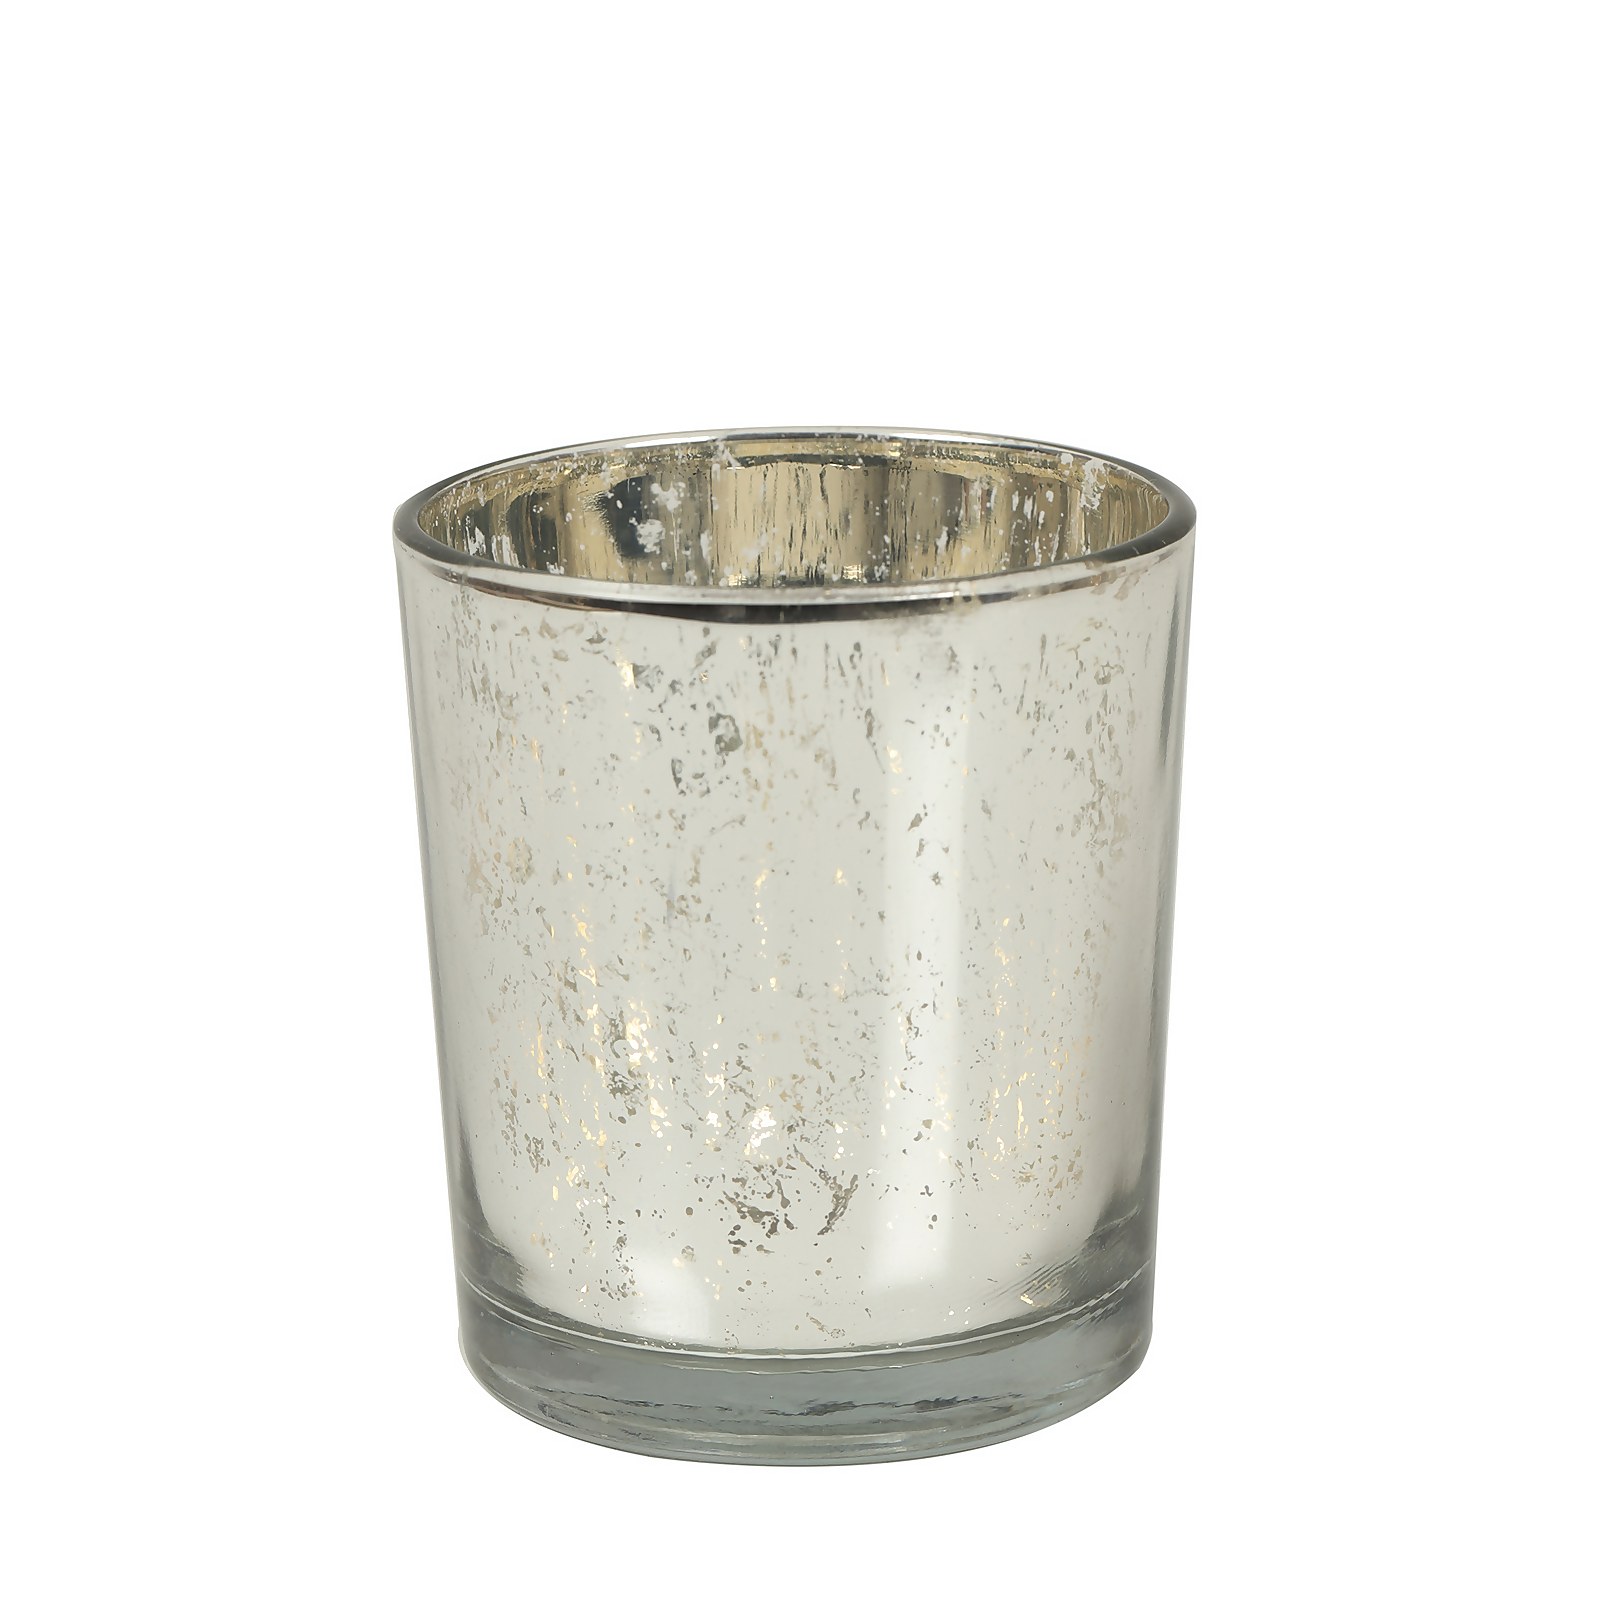 Photo of Country Living Mercury Tealight Holder - Small